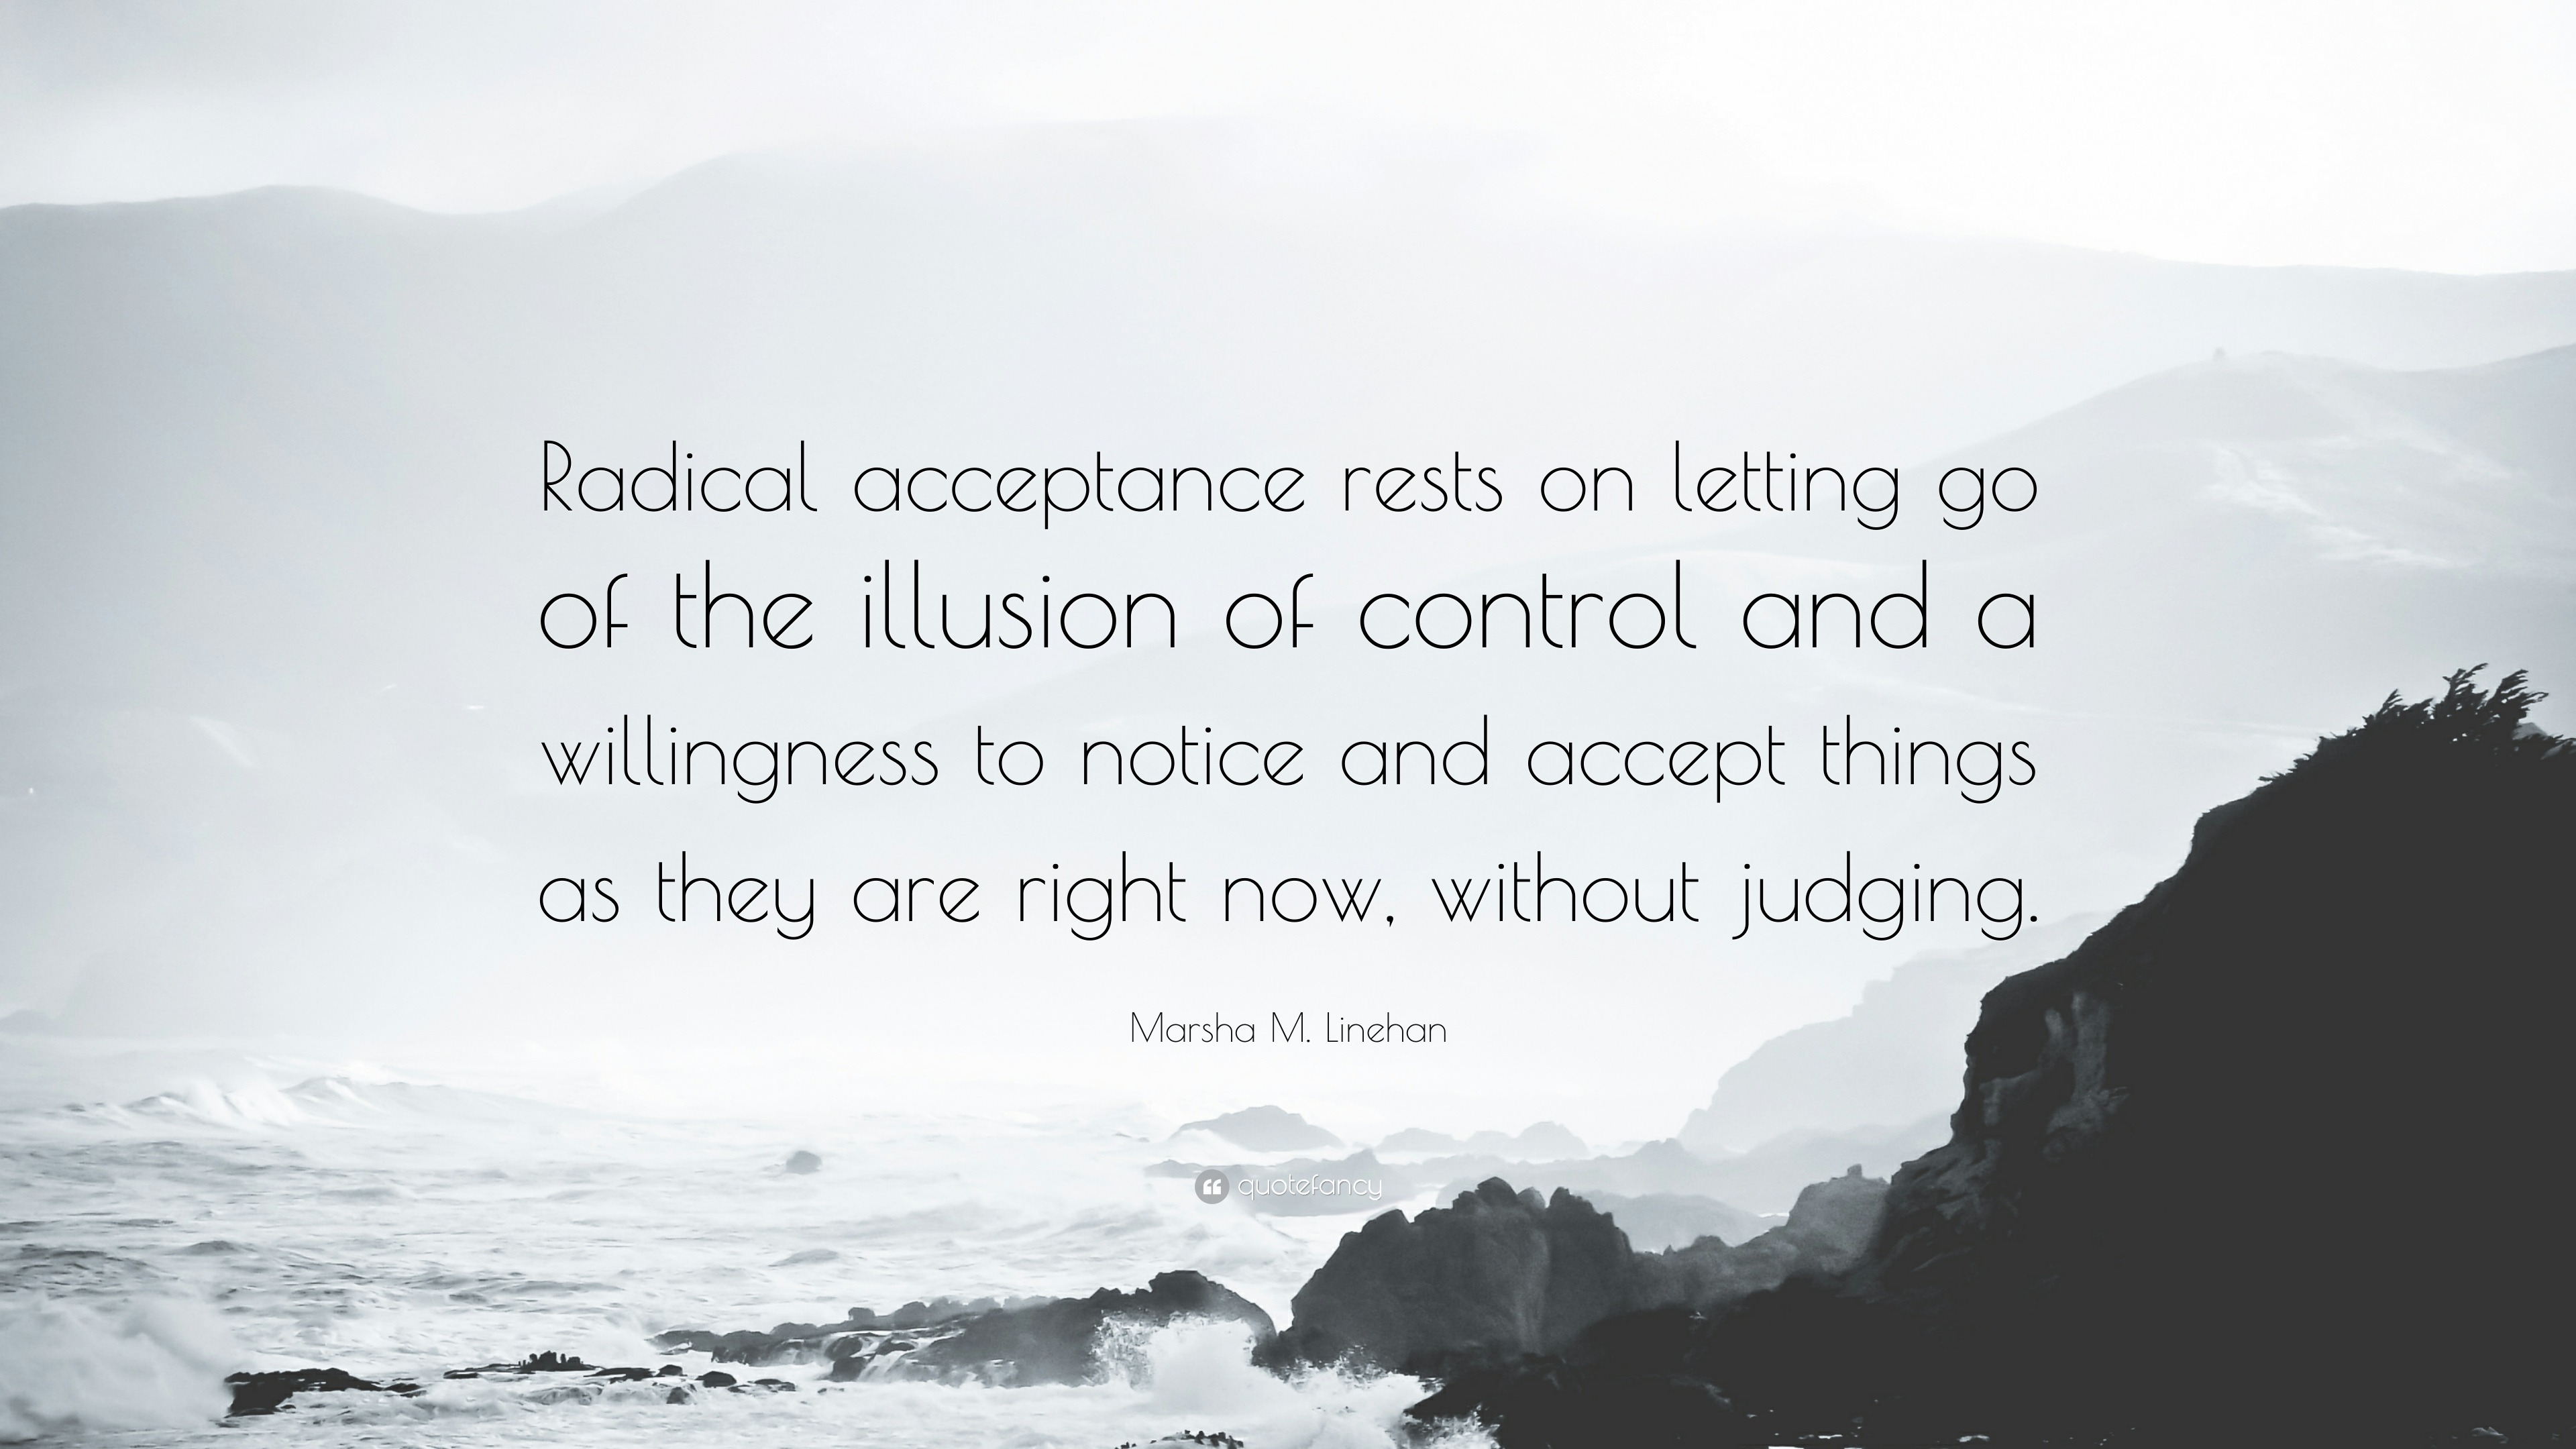 Marsha M. Linehan Quote “Radical acceptance rests on letting go ...